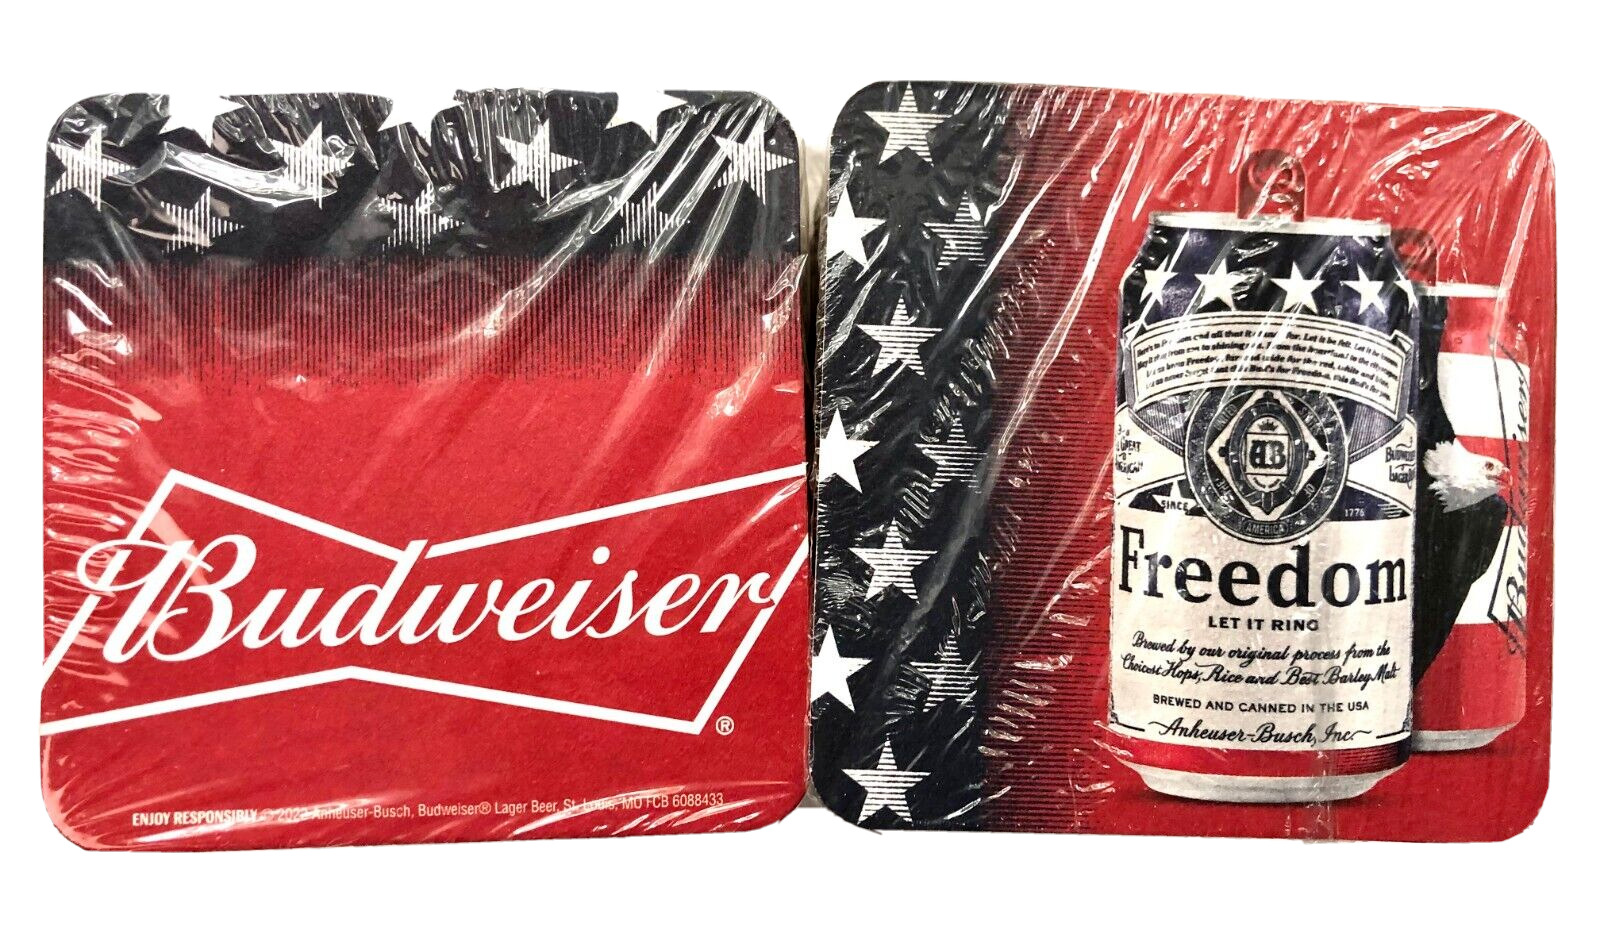 *NEW* BUDWEISER - FREEDOM - LET IT RING - SLEEVE of 125 BEER COASTERS - 2022